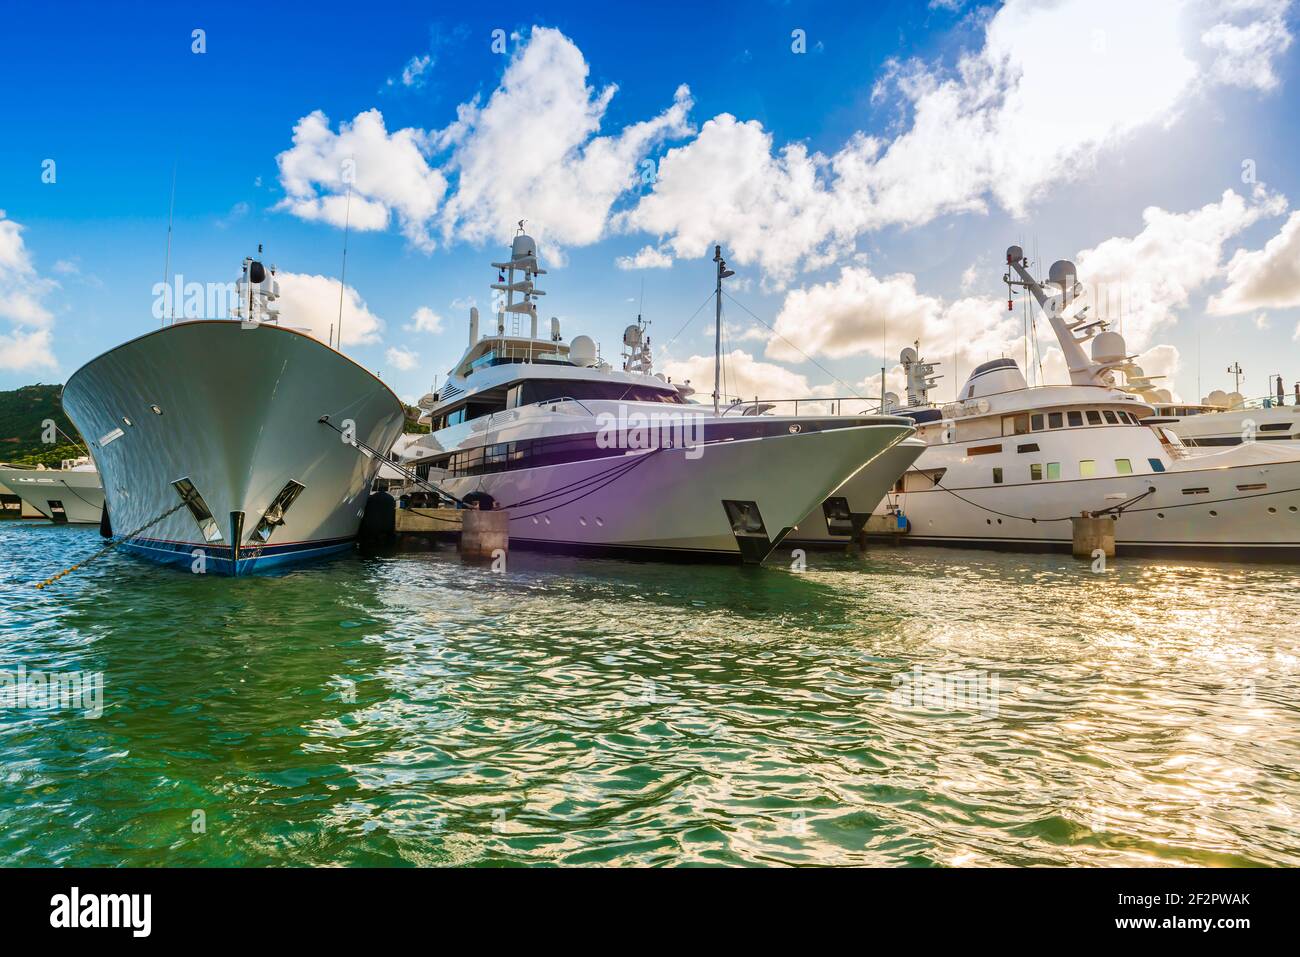 Gigantic yachts moored on the Dutch side of the island of Saint Martin in the Caribbean Stock Photo